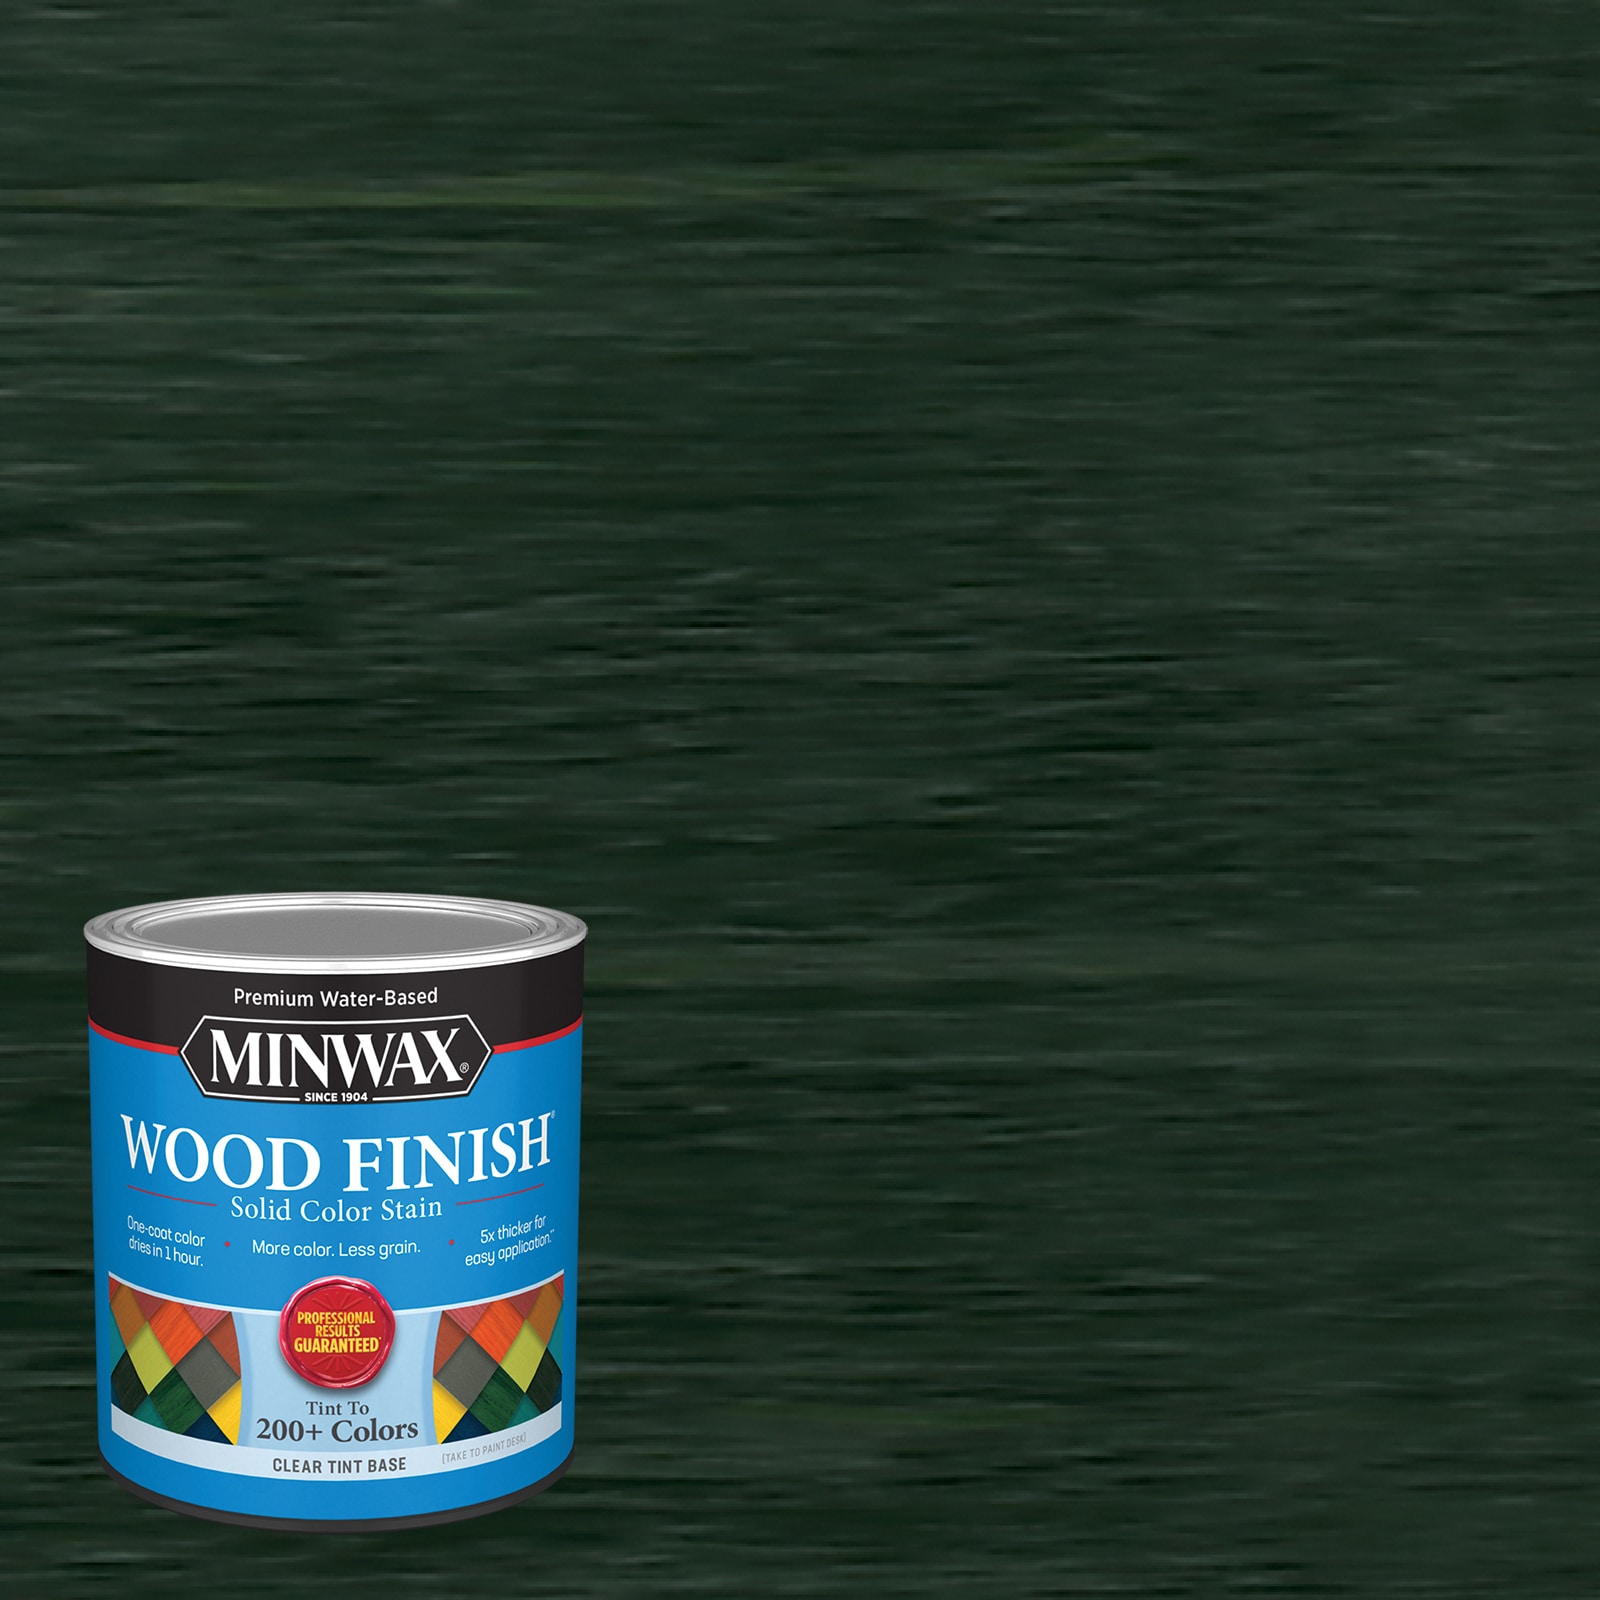 Minwax Wood Finish Water-Based Hunter Green Mw1039 Semi-Transparent  Interior Stain (1-Quart) in the Interior Stains department at